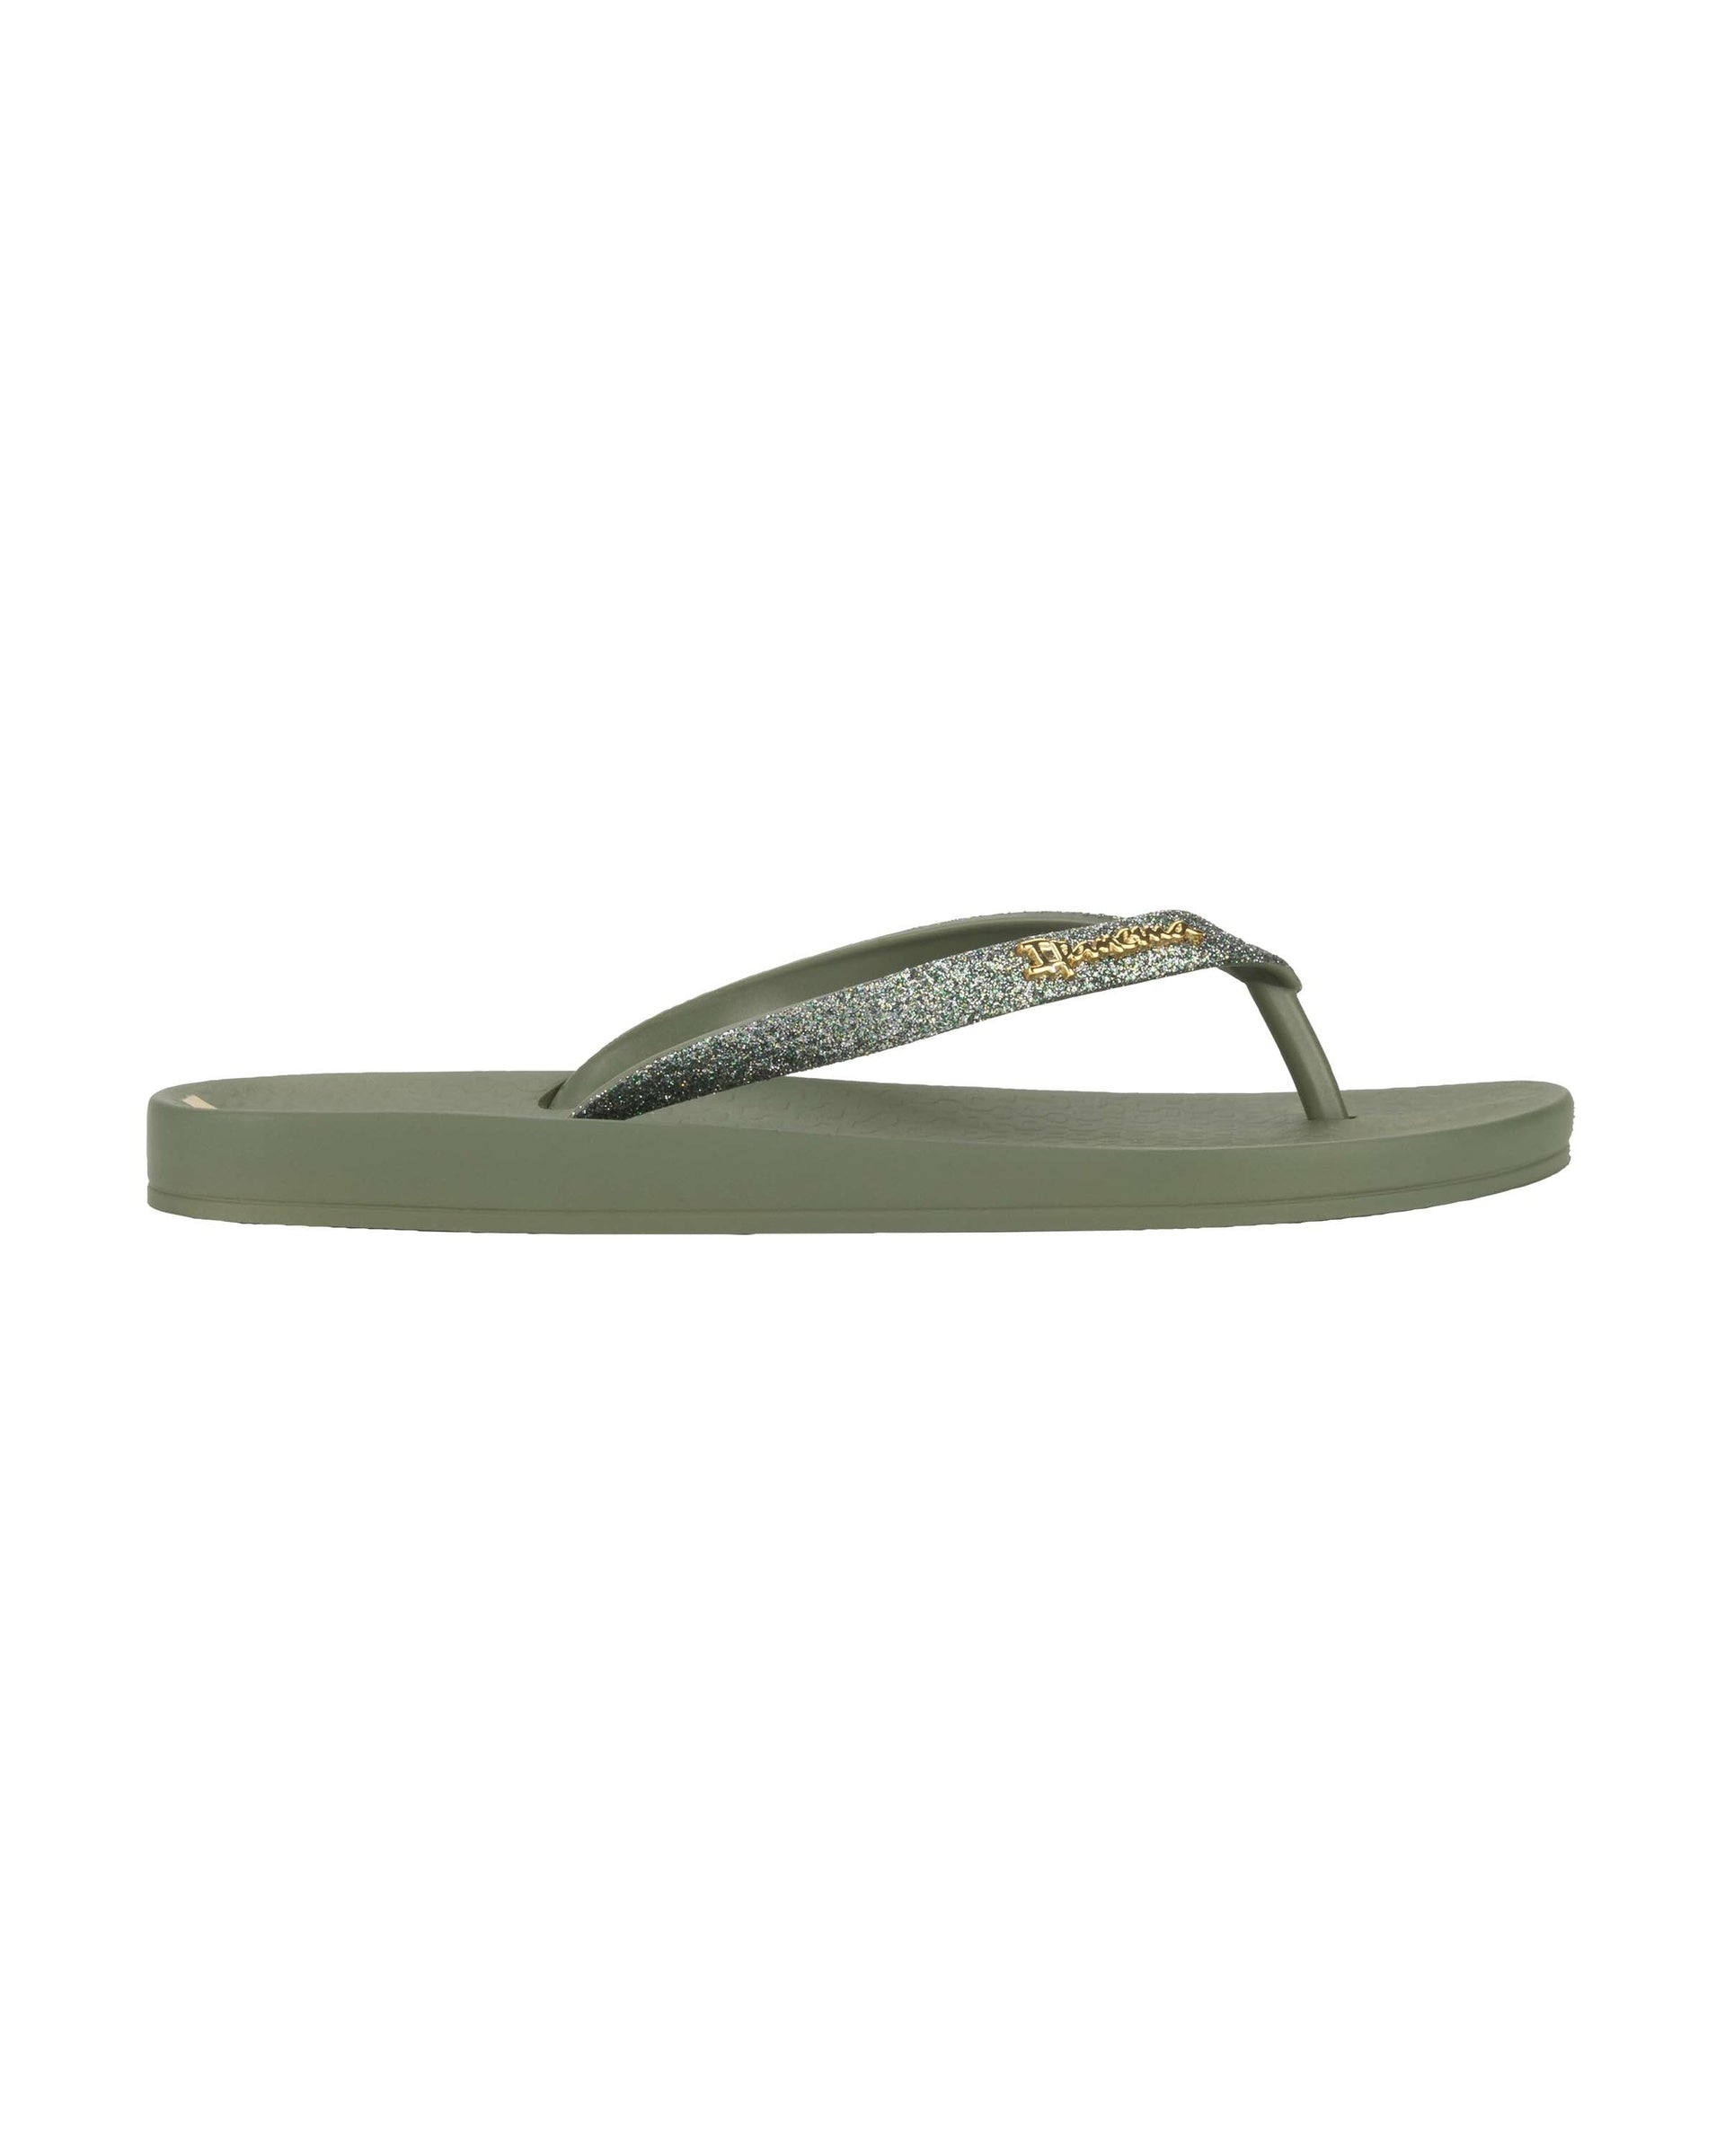 Outer side view of a green Ipanema Ana Sparkle women's flip flop with glitter green straps.